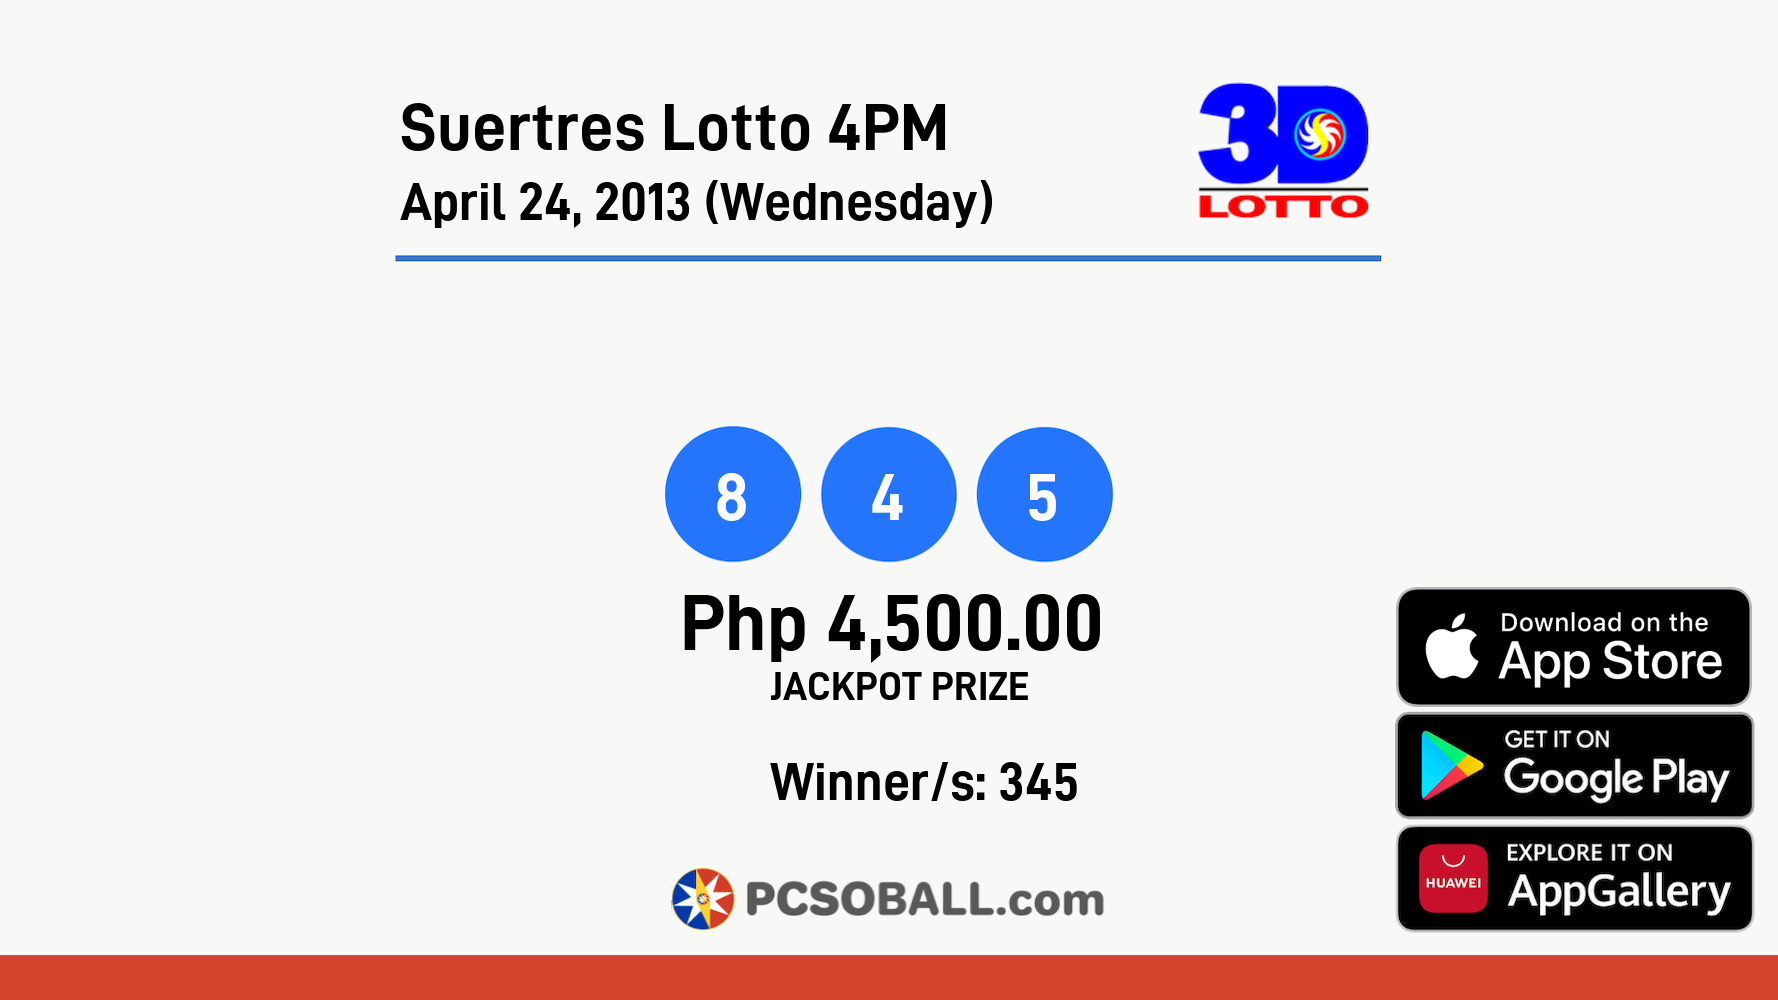 Suertres Lotto 4PM April 24, 2013 (Wednesday) Result